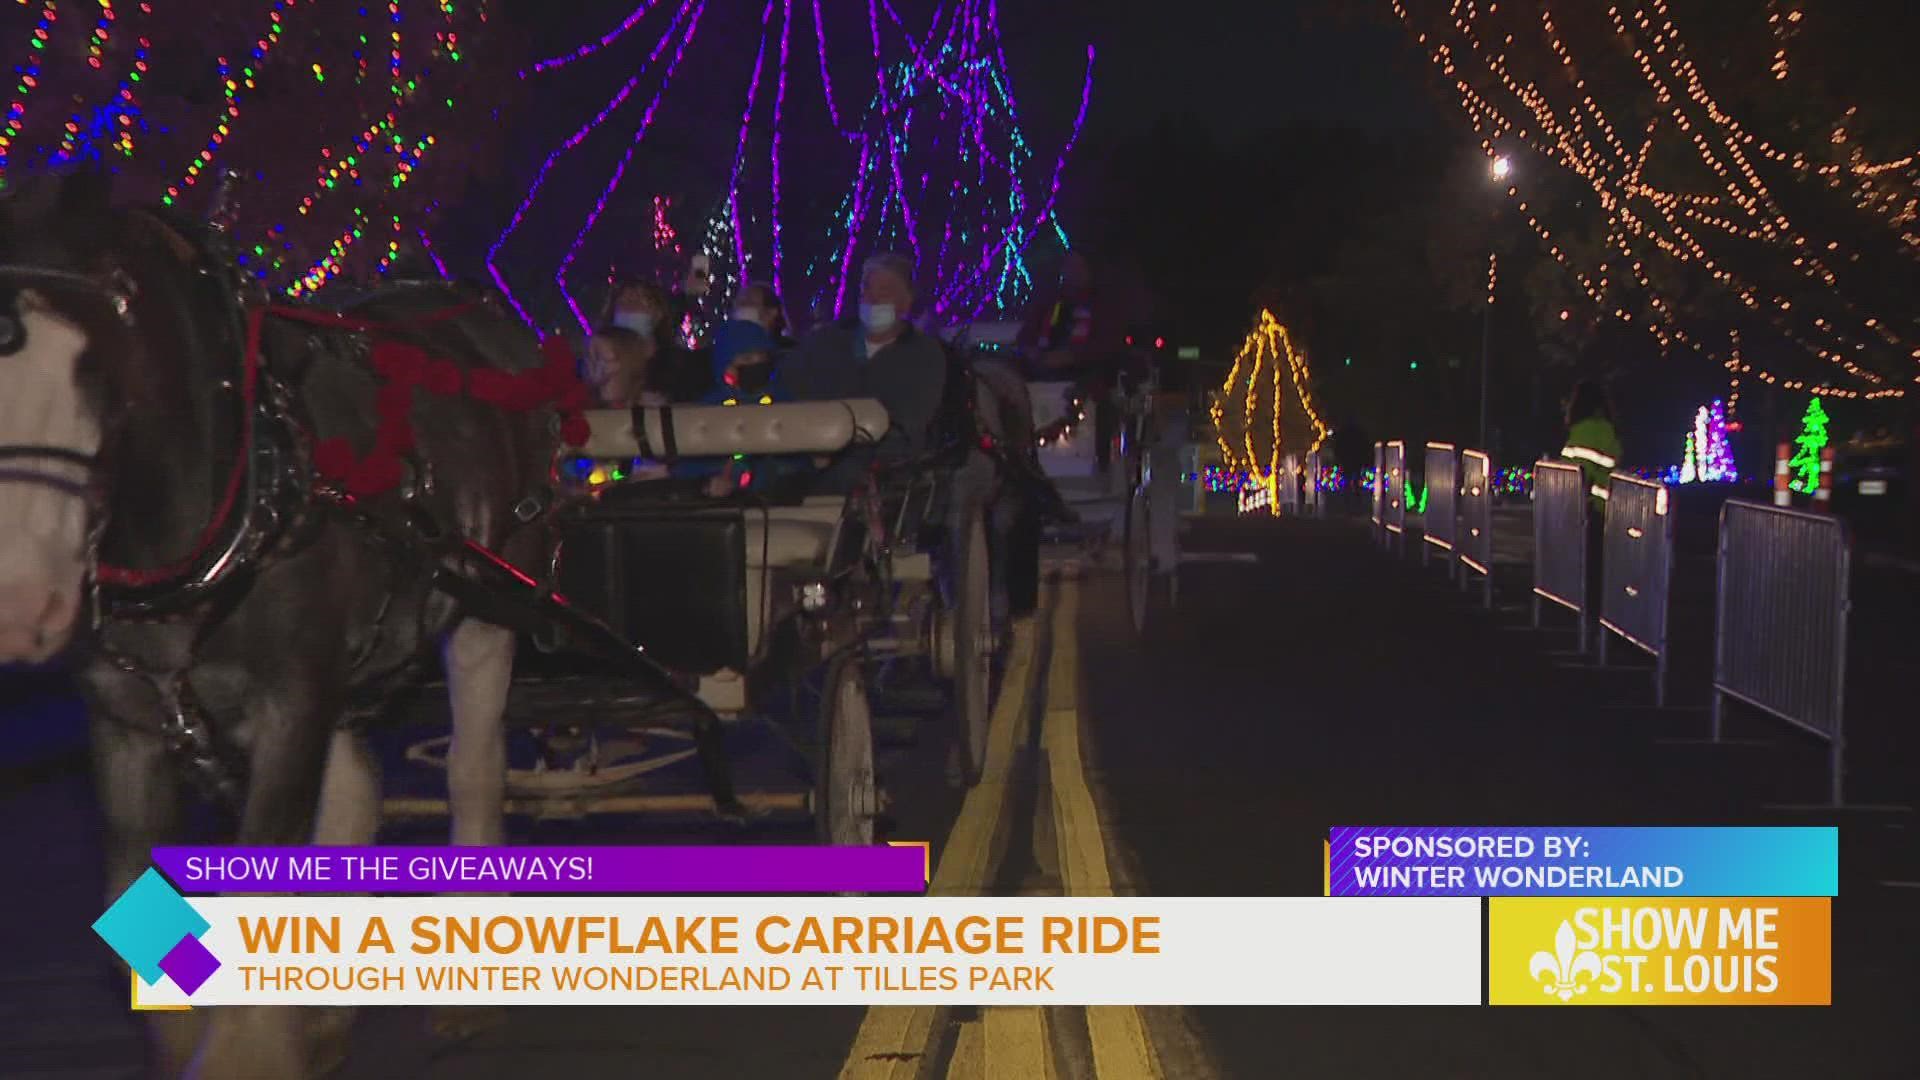 Three (3) winners will receive a private Snowflake Carriage ride on Tuesday, December 27 at Tilles Park.